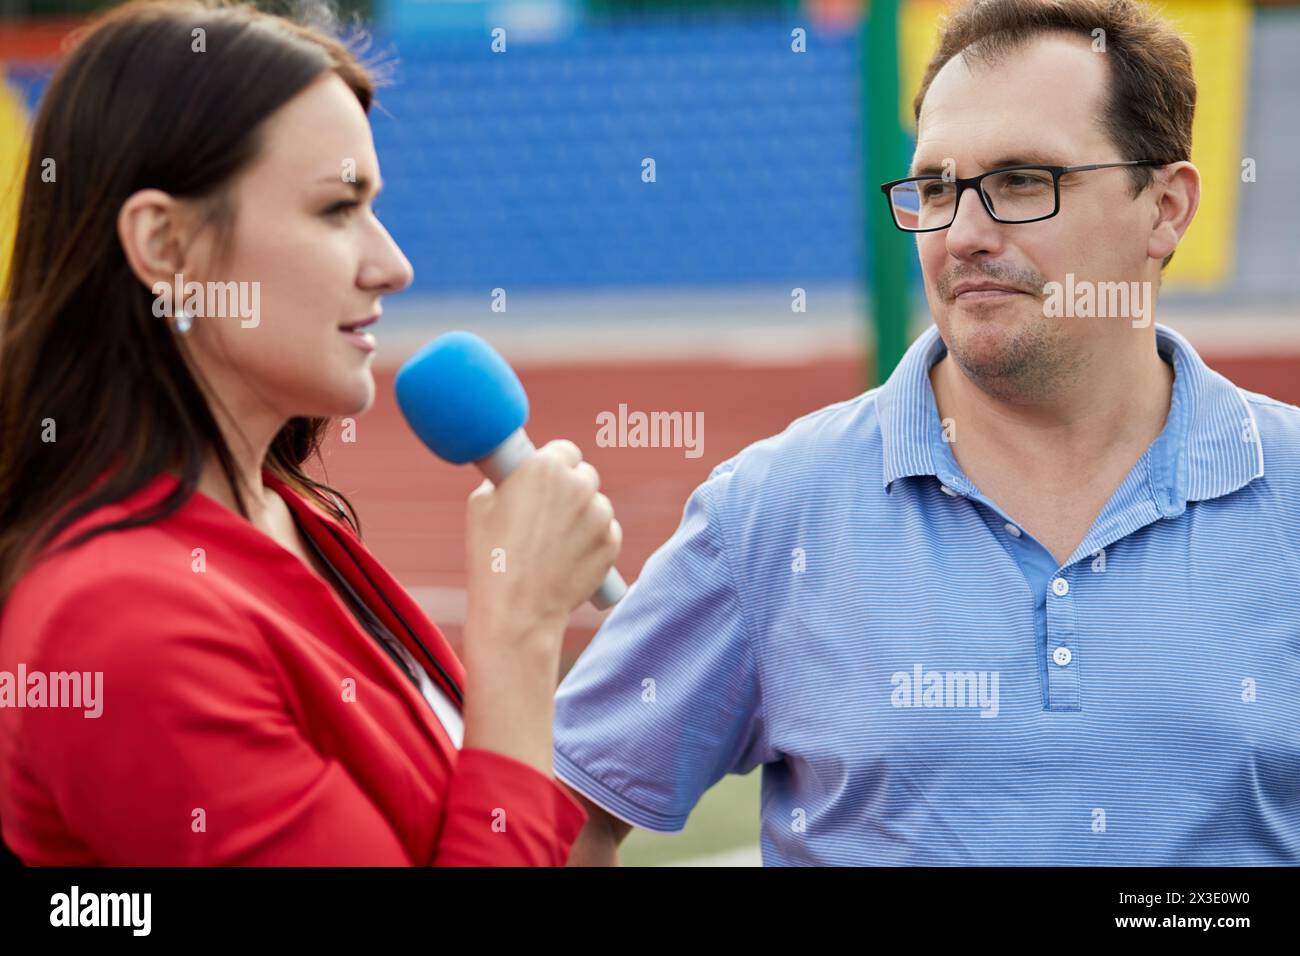 Young female journalist interviews man, focus on man. Stock Photo